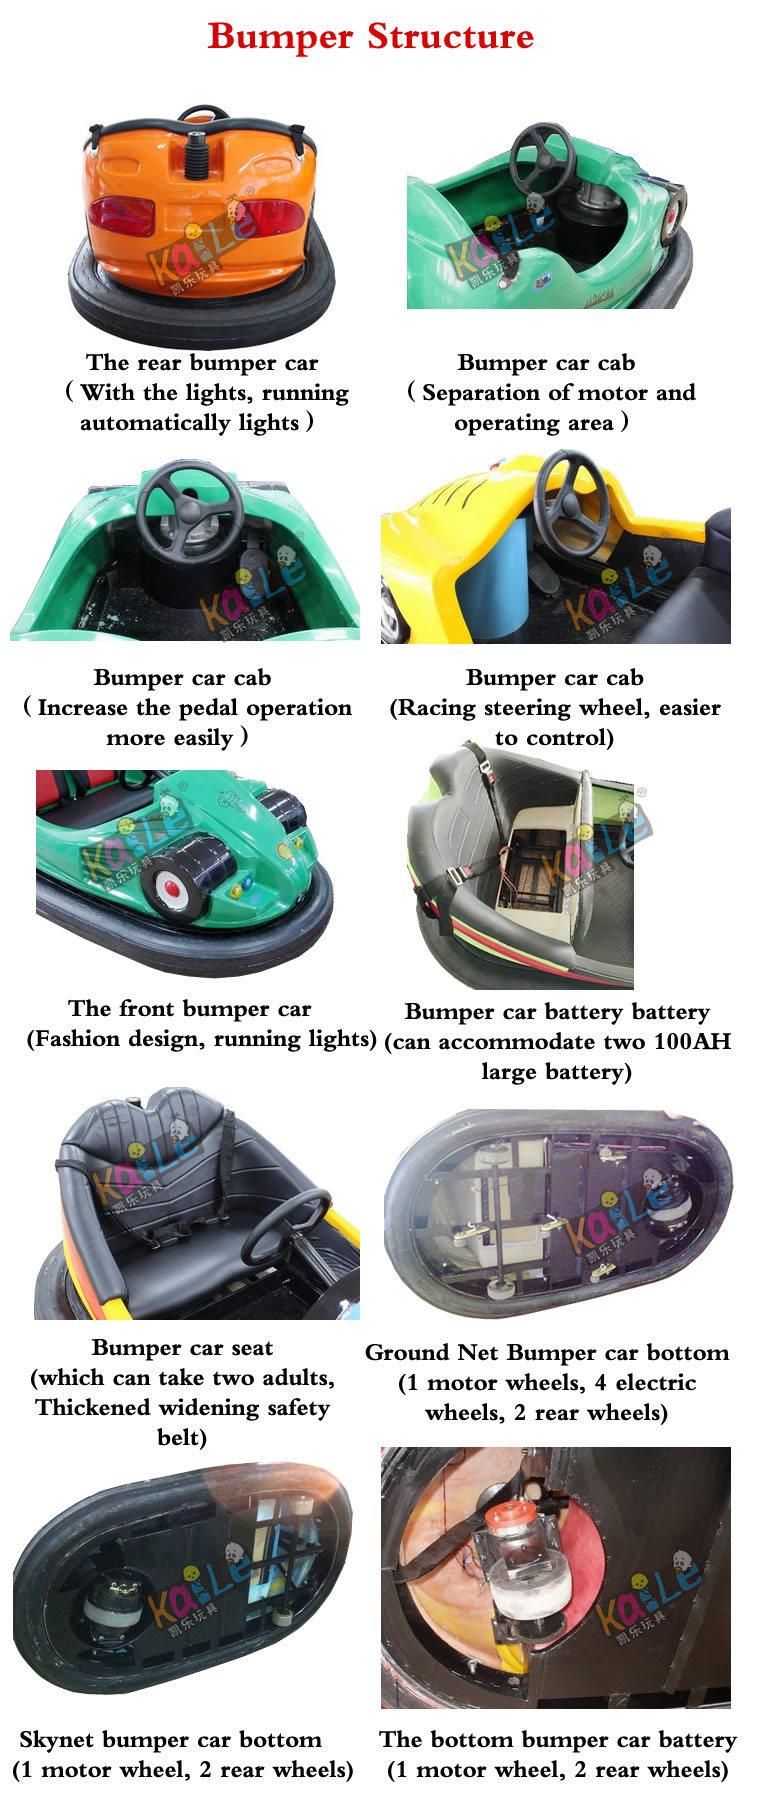 European Standard Ground-Grid Electric Bumper Car All Colors Available F1 Racing Bumper Car Electric Net Dodgem Car for Kids and Adult (PPC-104I)